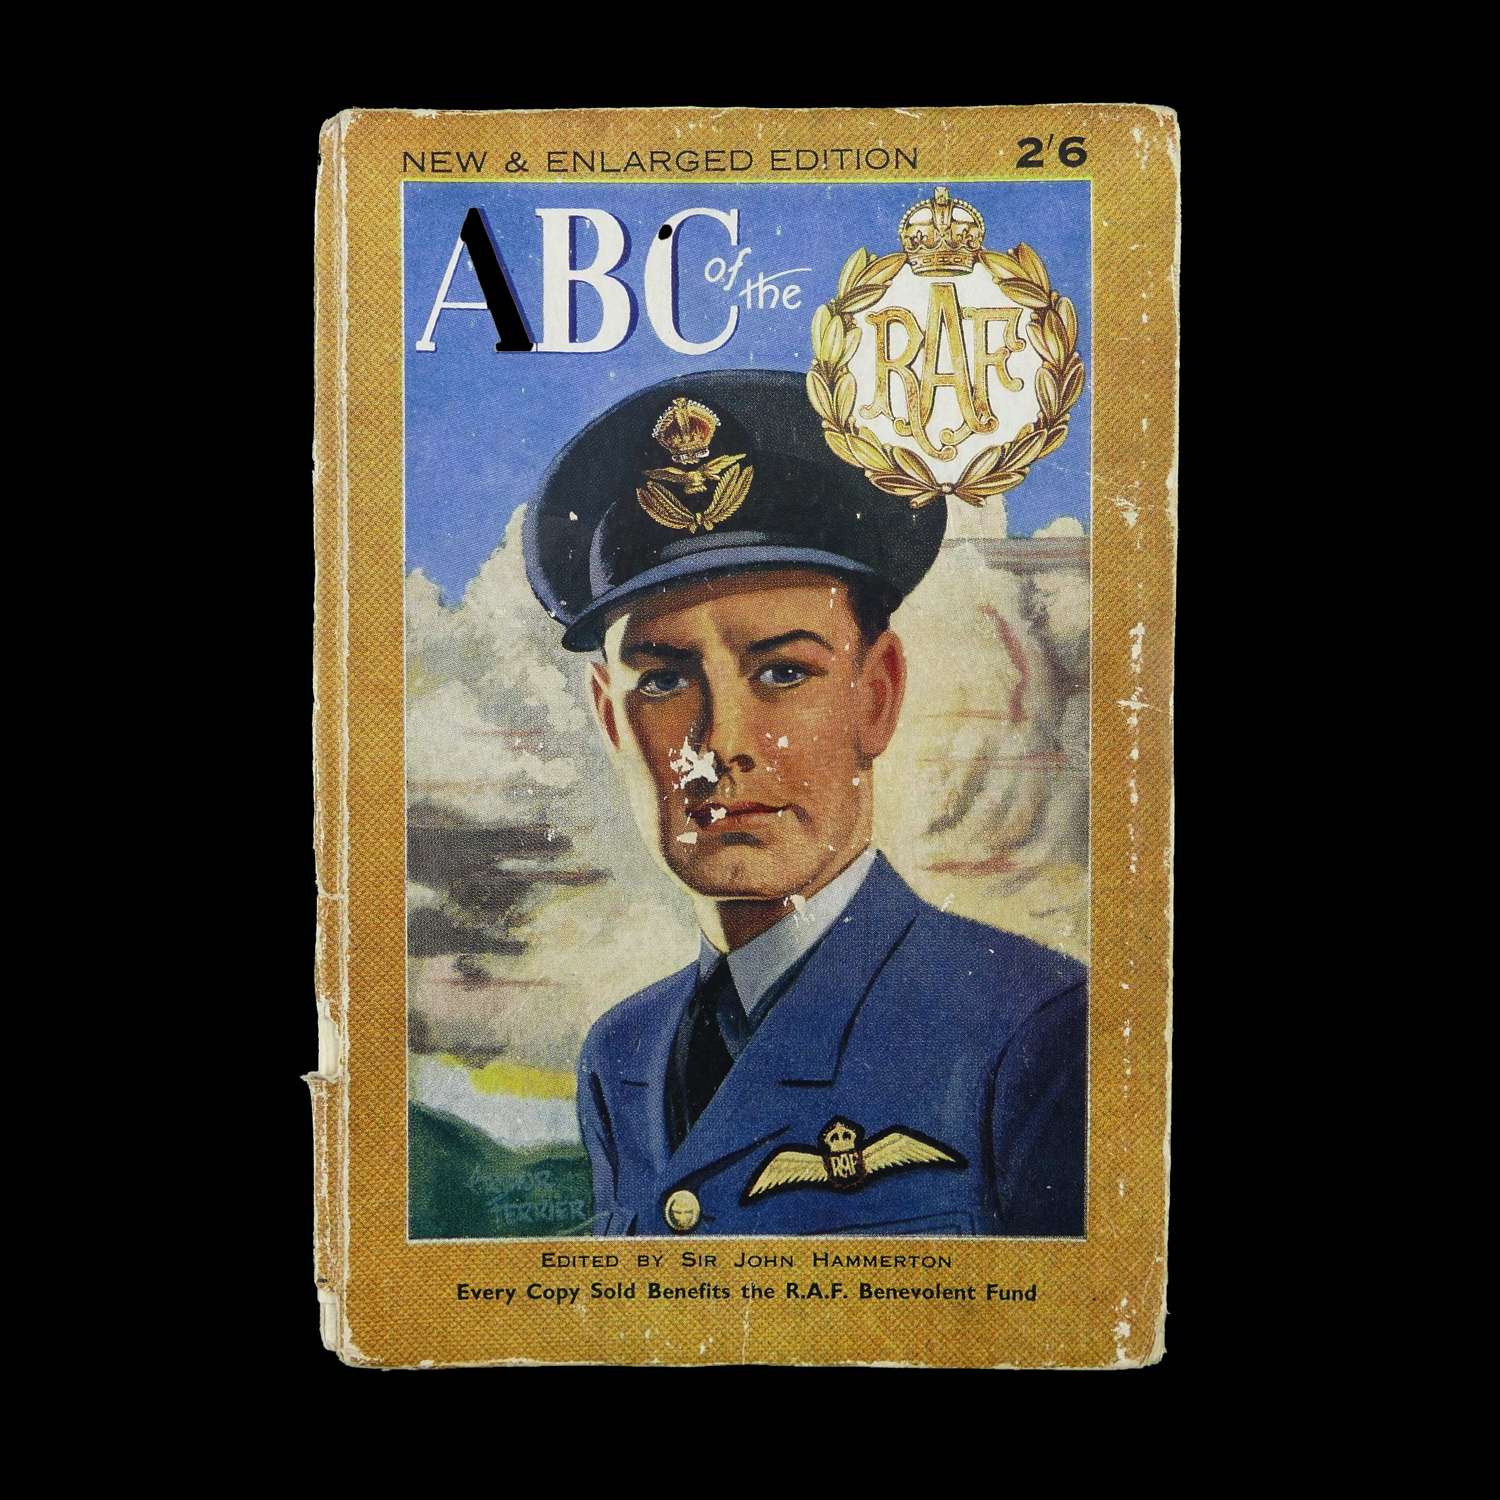 The ABC of the RAF